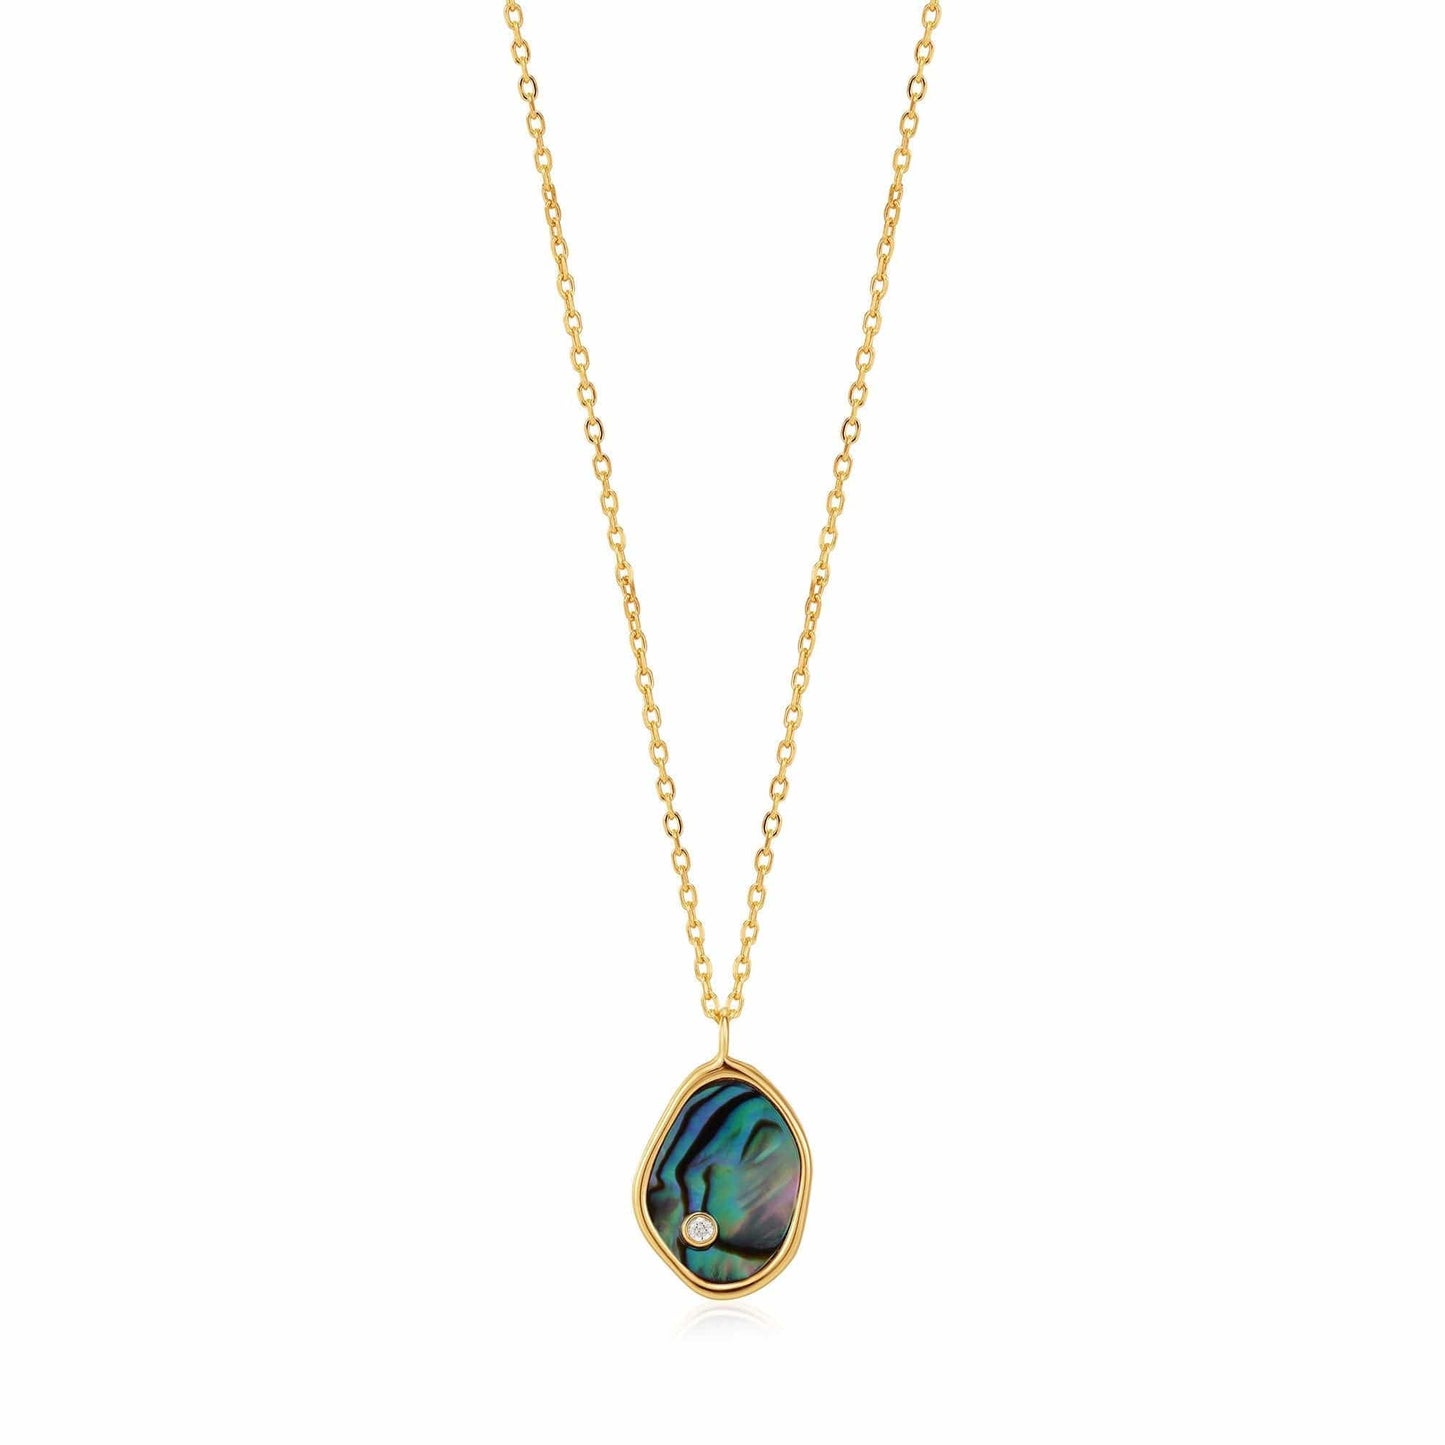 NKL-GPL Gold Tidal Abalone Necklace